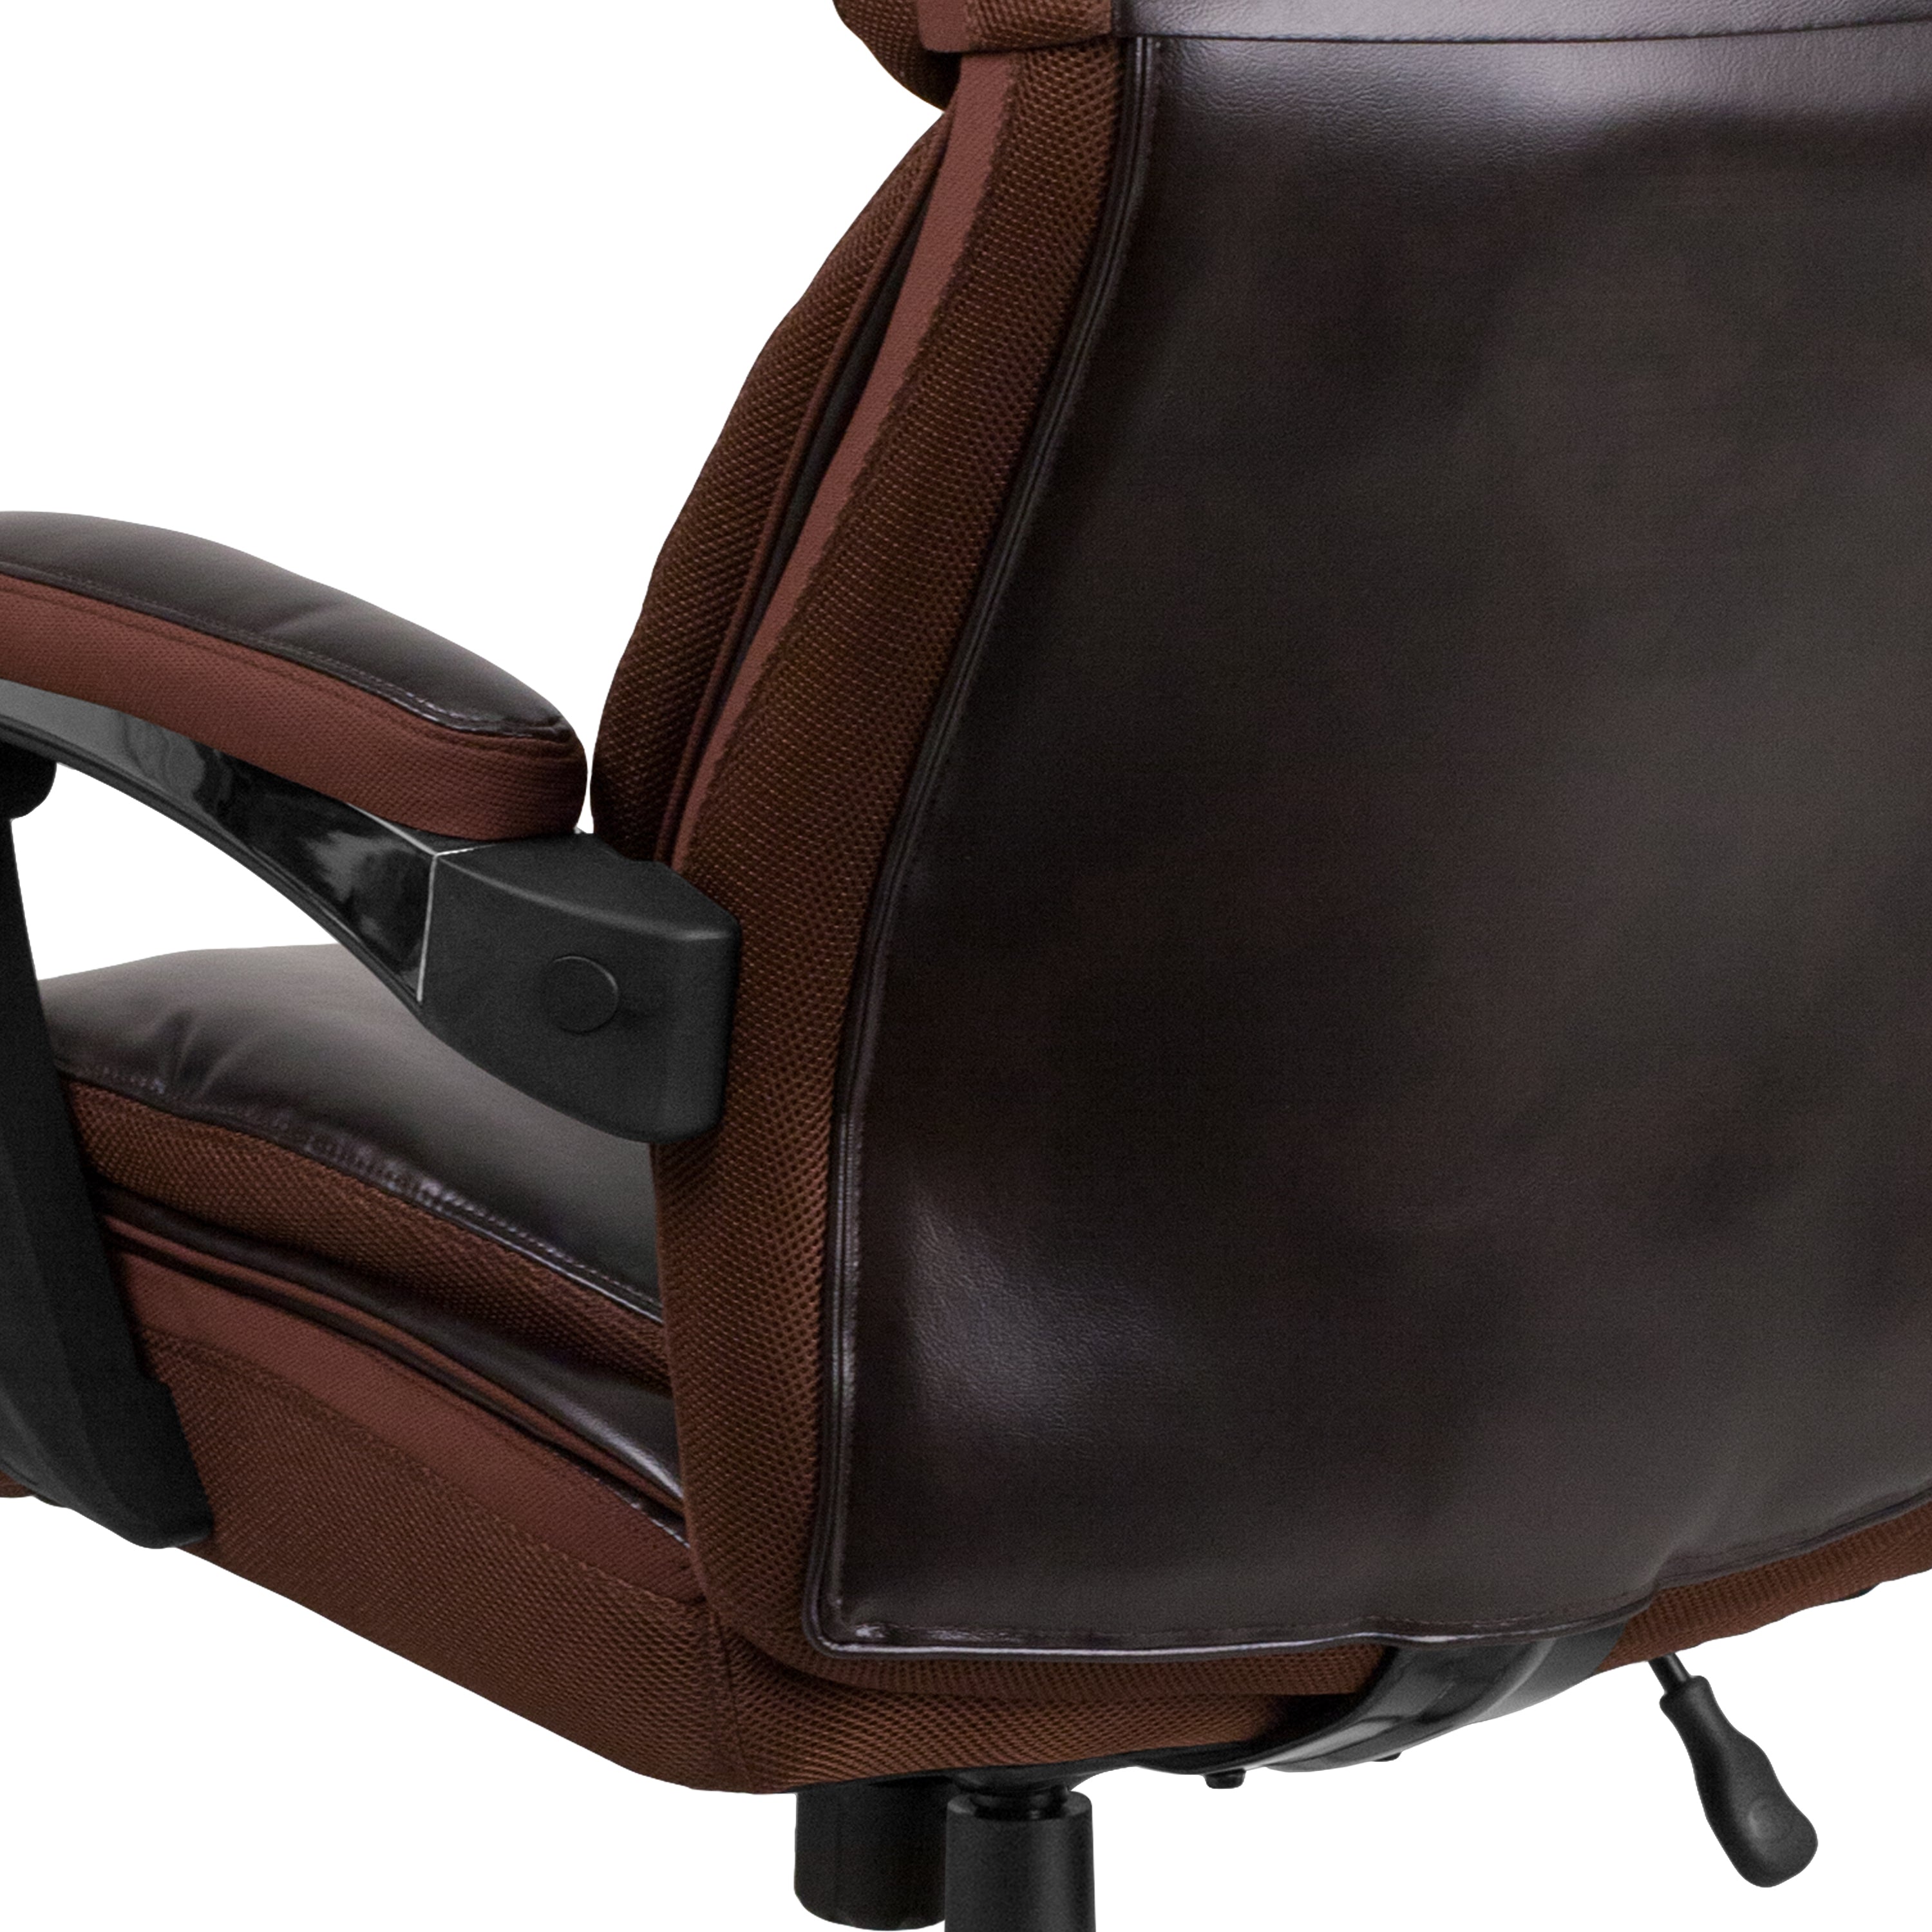 HERCULES Series Big & Tall 500 lb. Rated LeatherSoft Executive Swivel Ergonomic Office Chair with Height Adjustable Headrest-Big & Tall Office Chair-Flash Furniture-Wall2Wall Furnishings